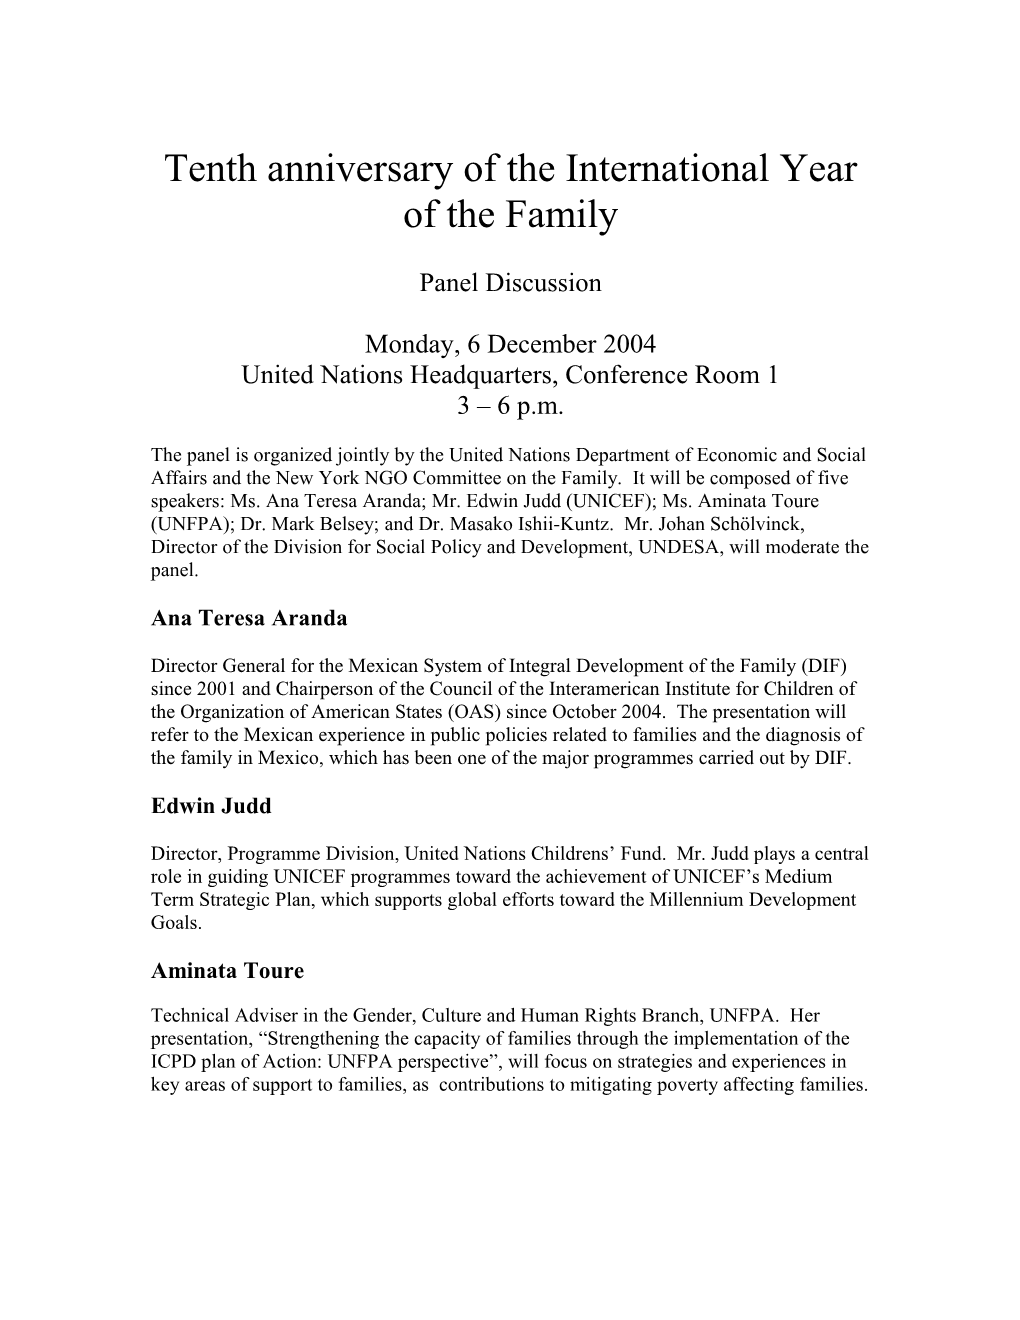 Tenth Anniversary of the International Year of the Family